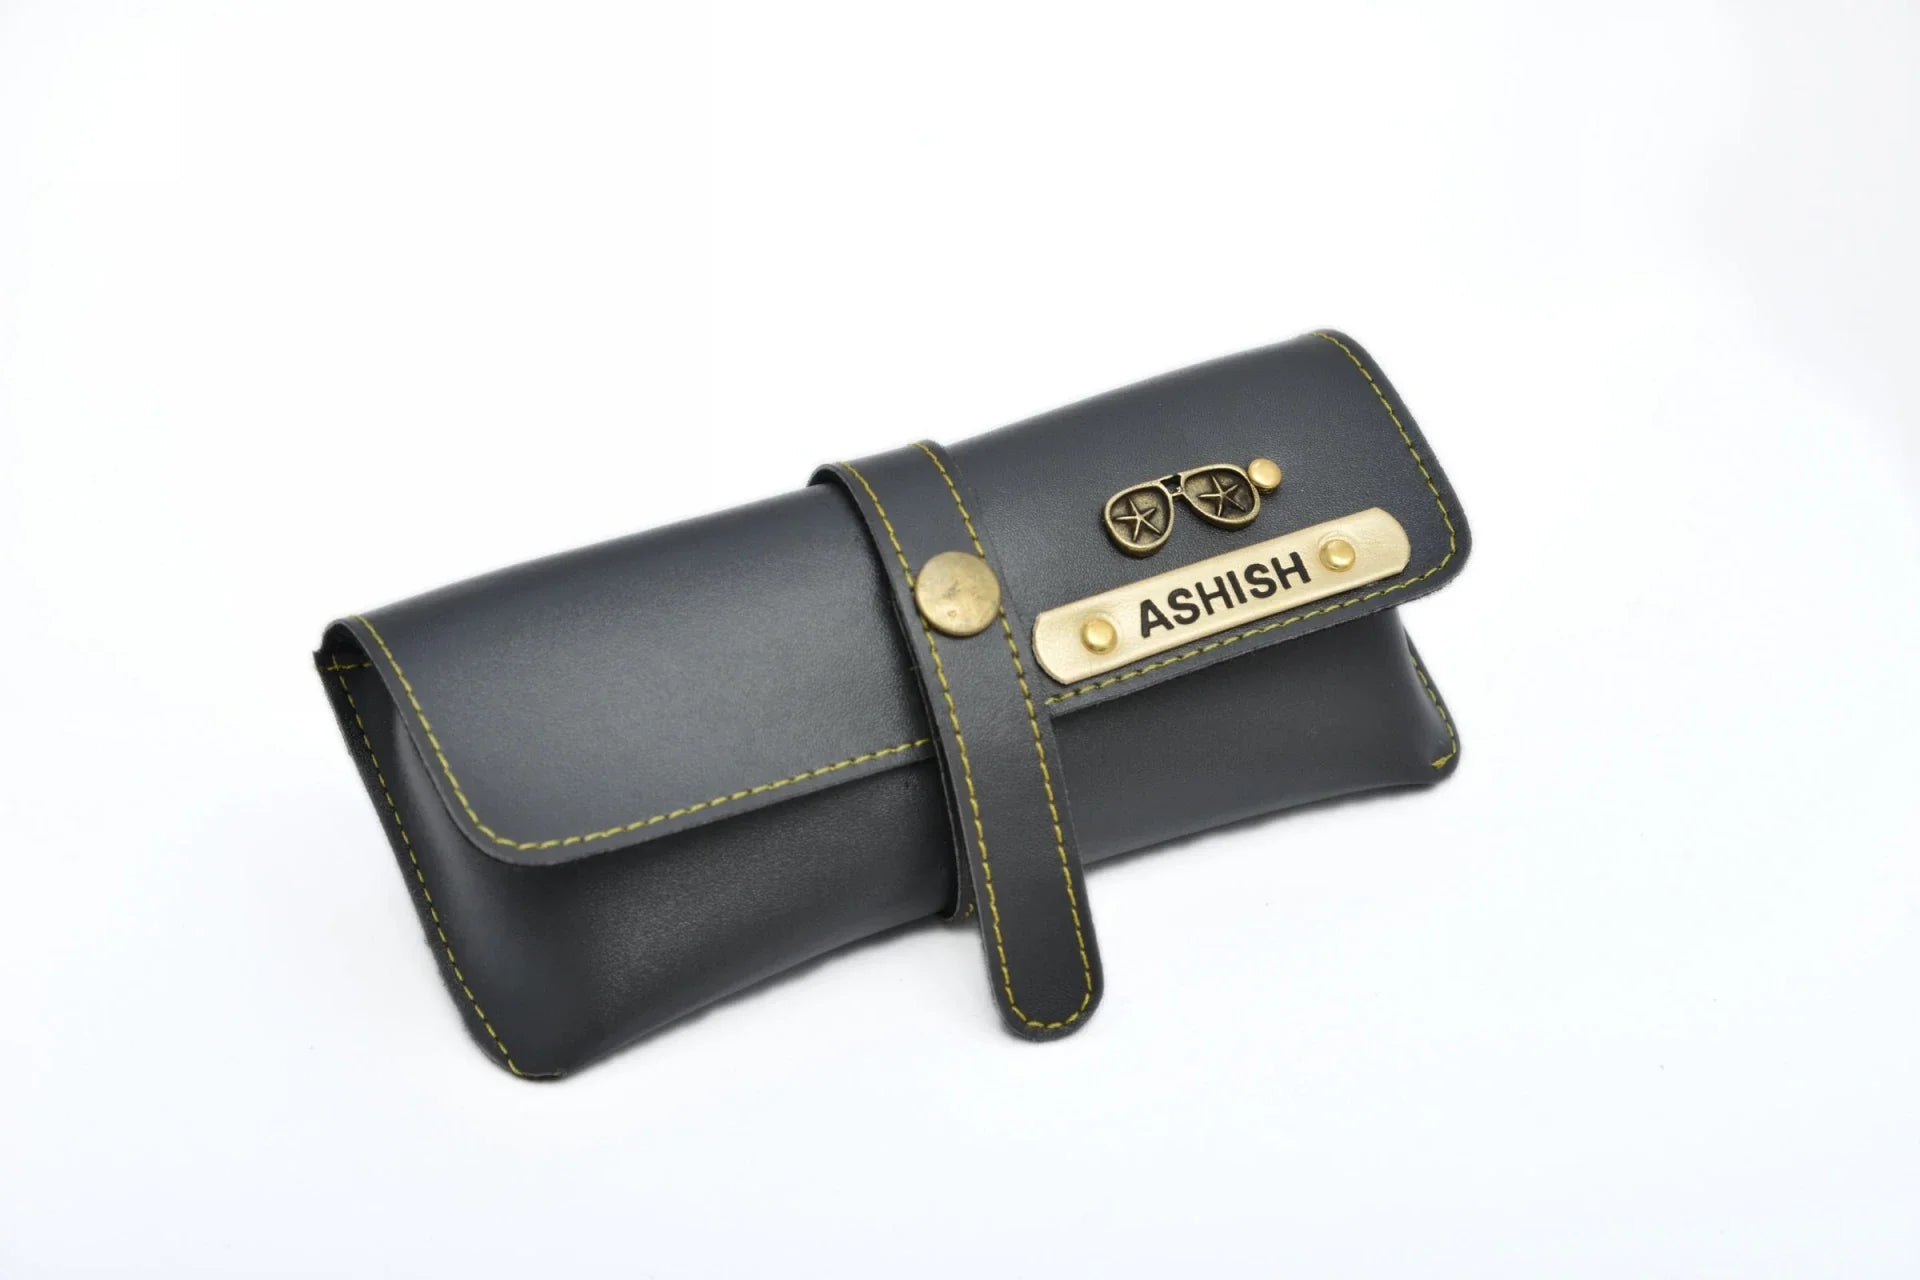 Add your name and charm to the eyewear case and flaunt its classy leather, sturdy build and flawless finish